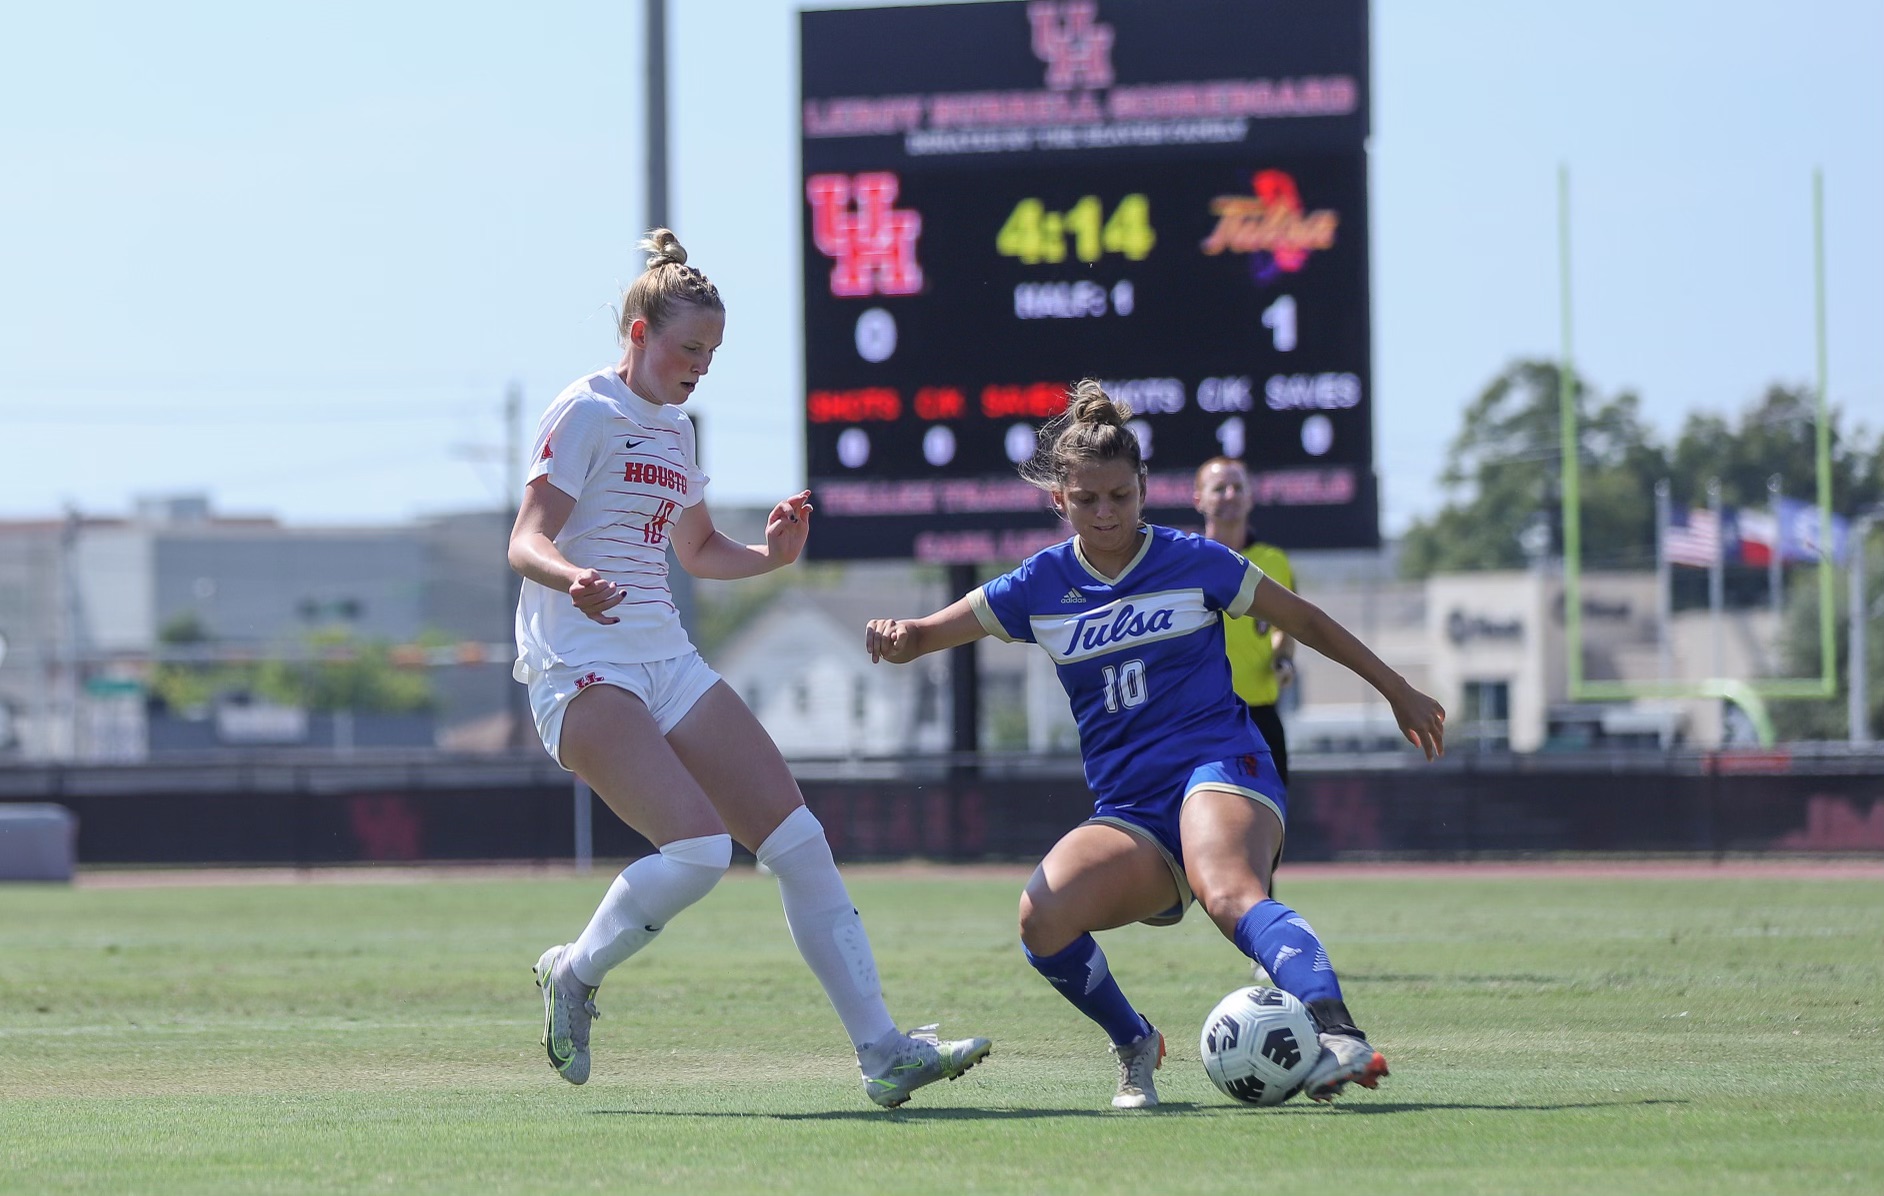 UH soccer was shutout by Tulsa on Sunday afternoon. | Sean Thomas/The Cougar